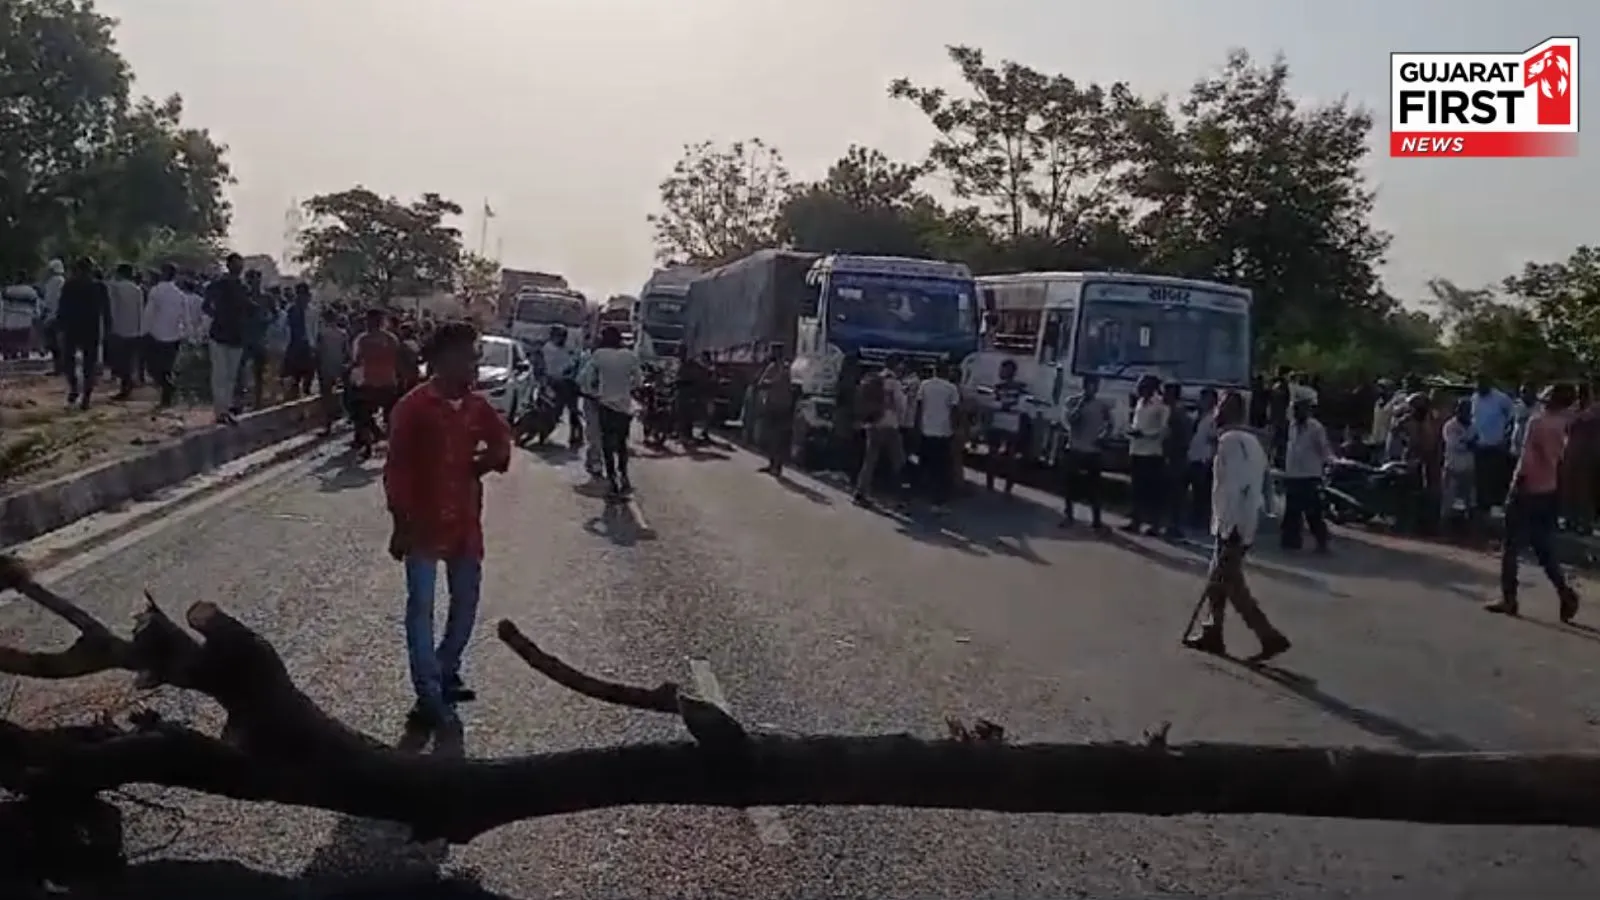 Agitated people blocked the Ahmedabad-Udepur National Highway due to the accident near Himmatnagar